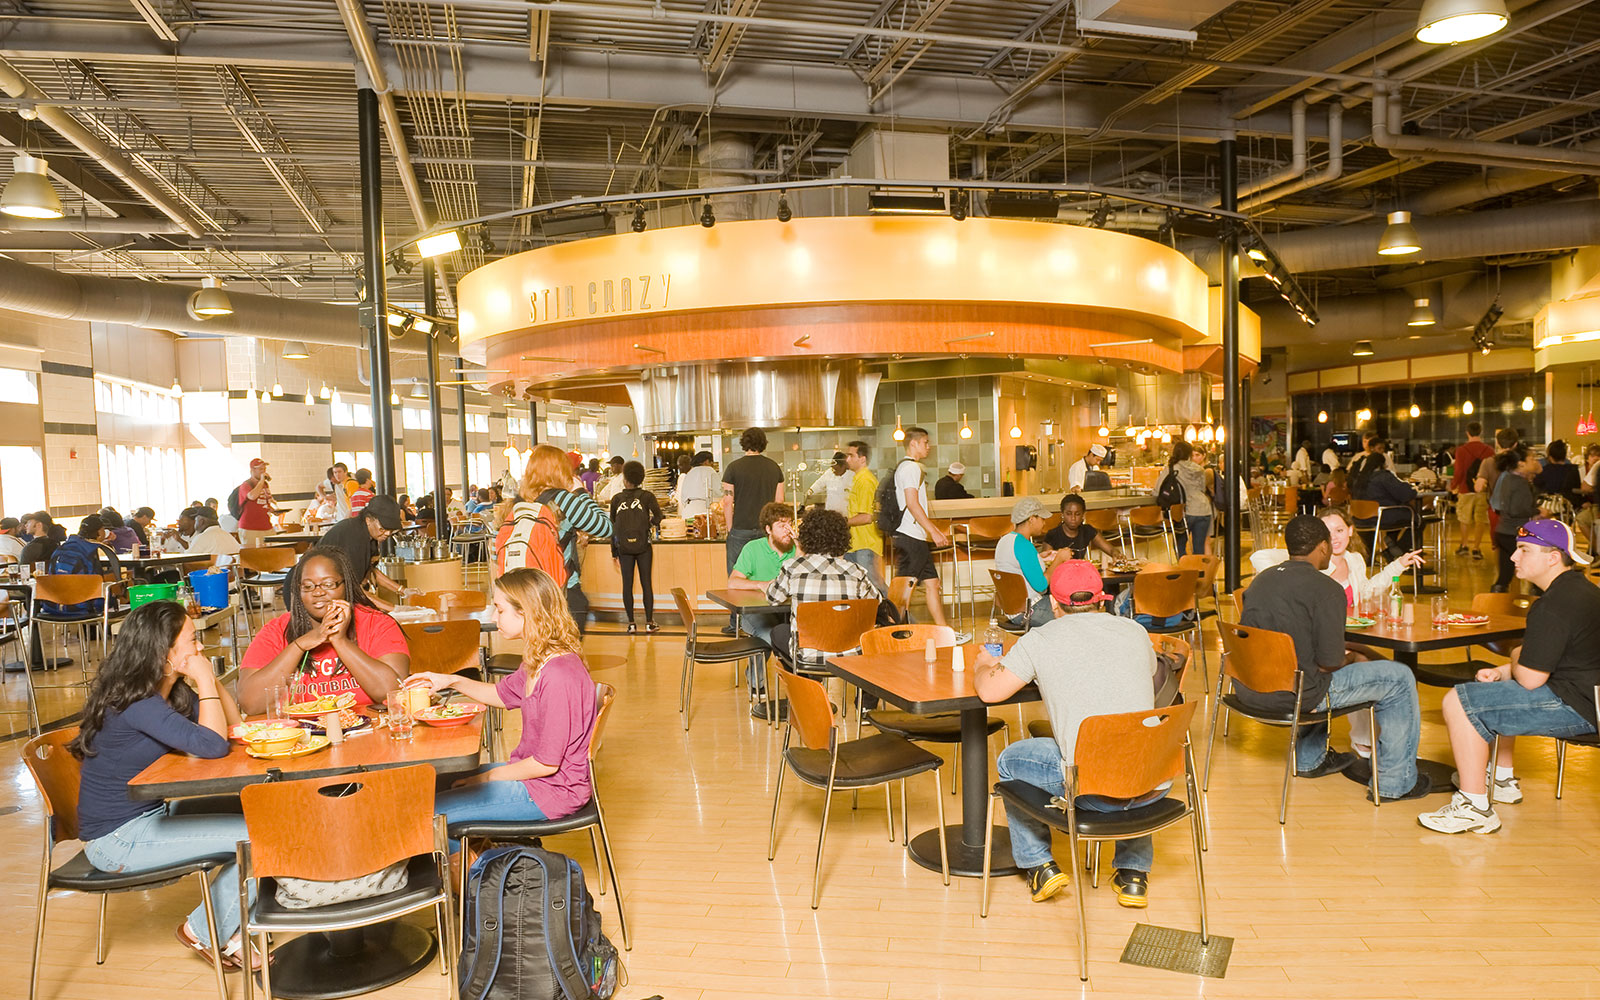 Students seated in the VCU dining hall